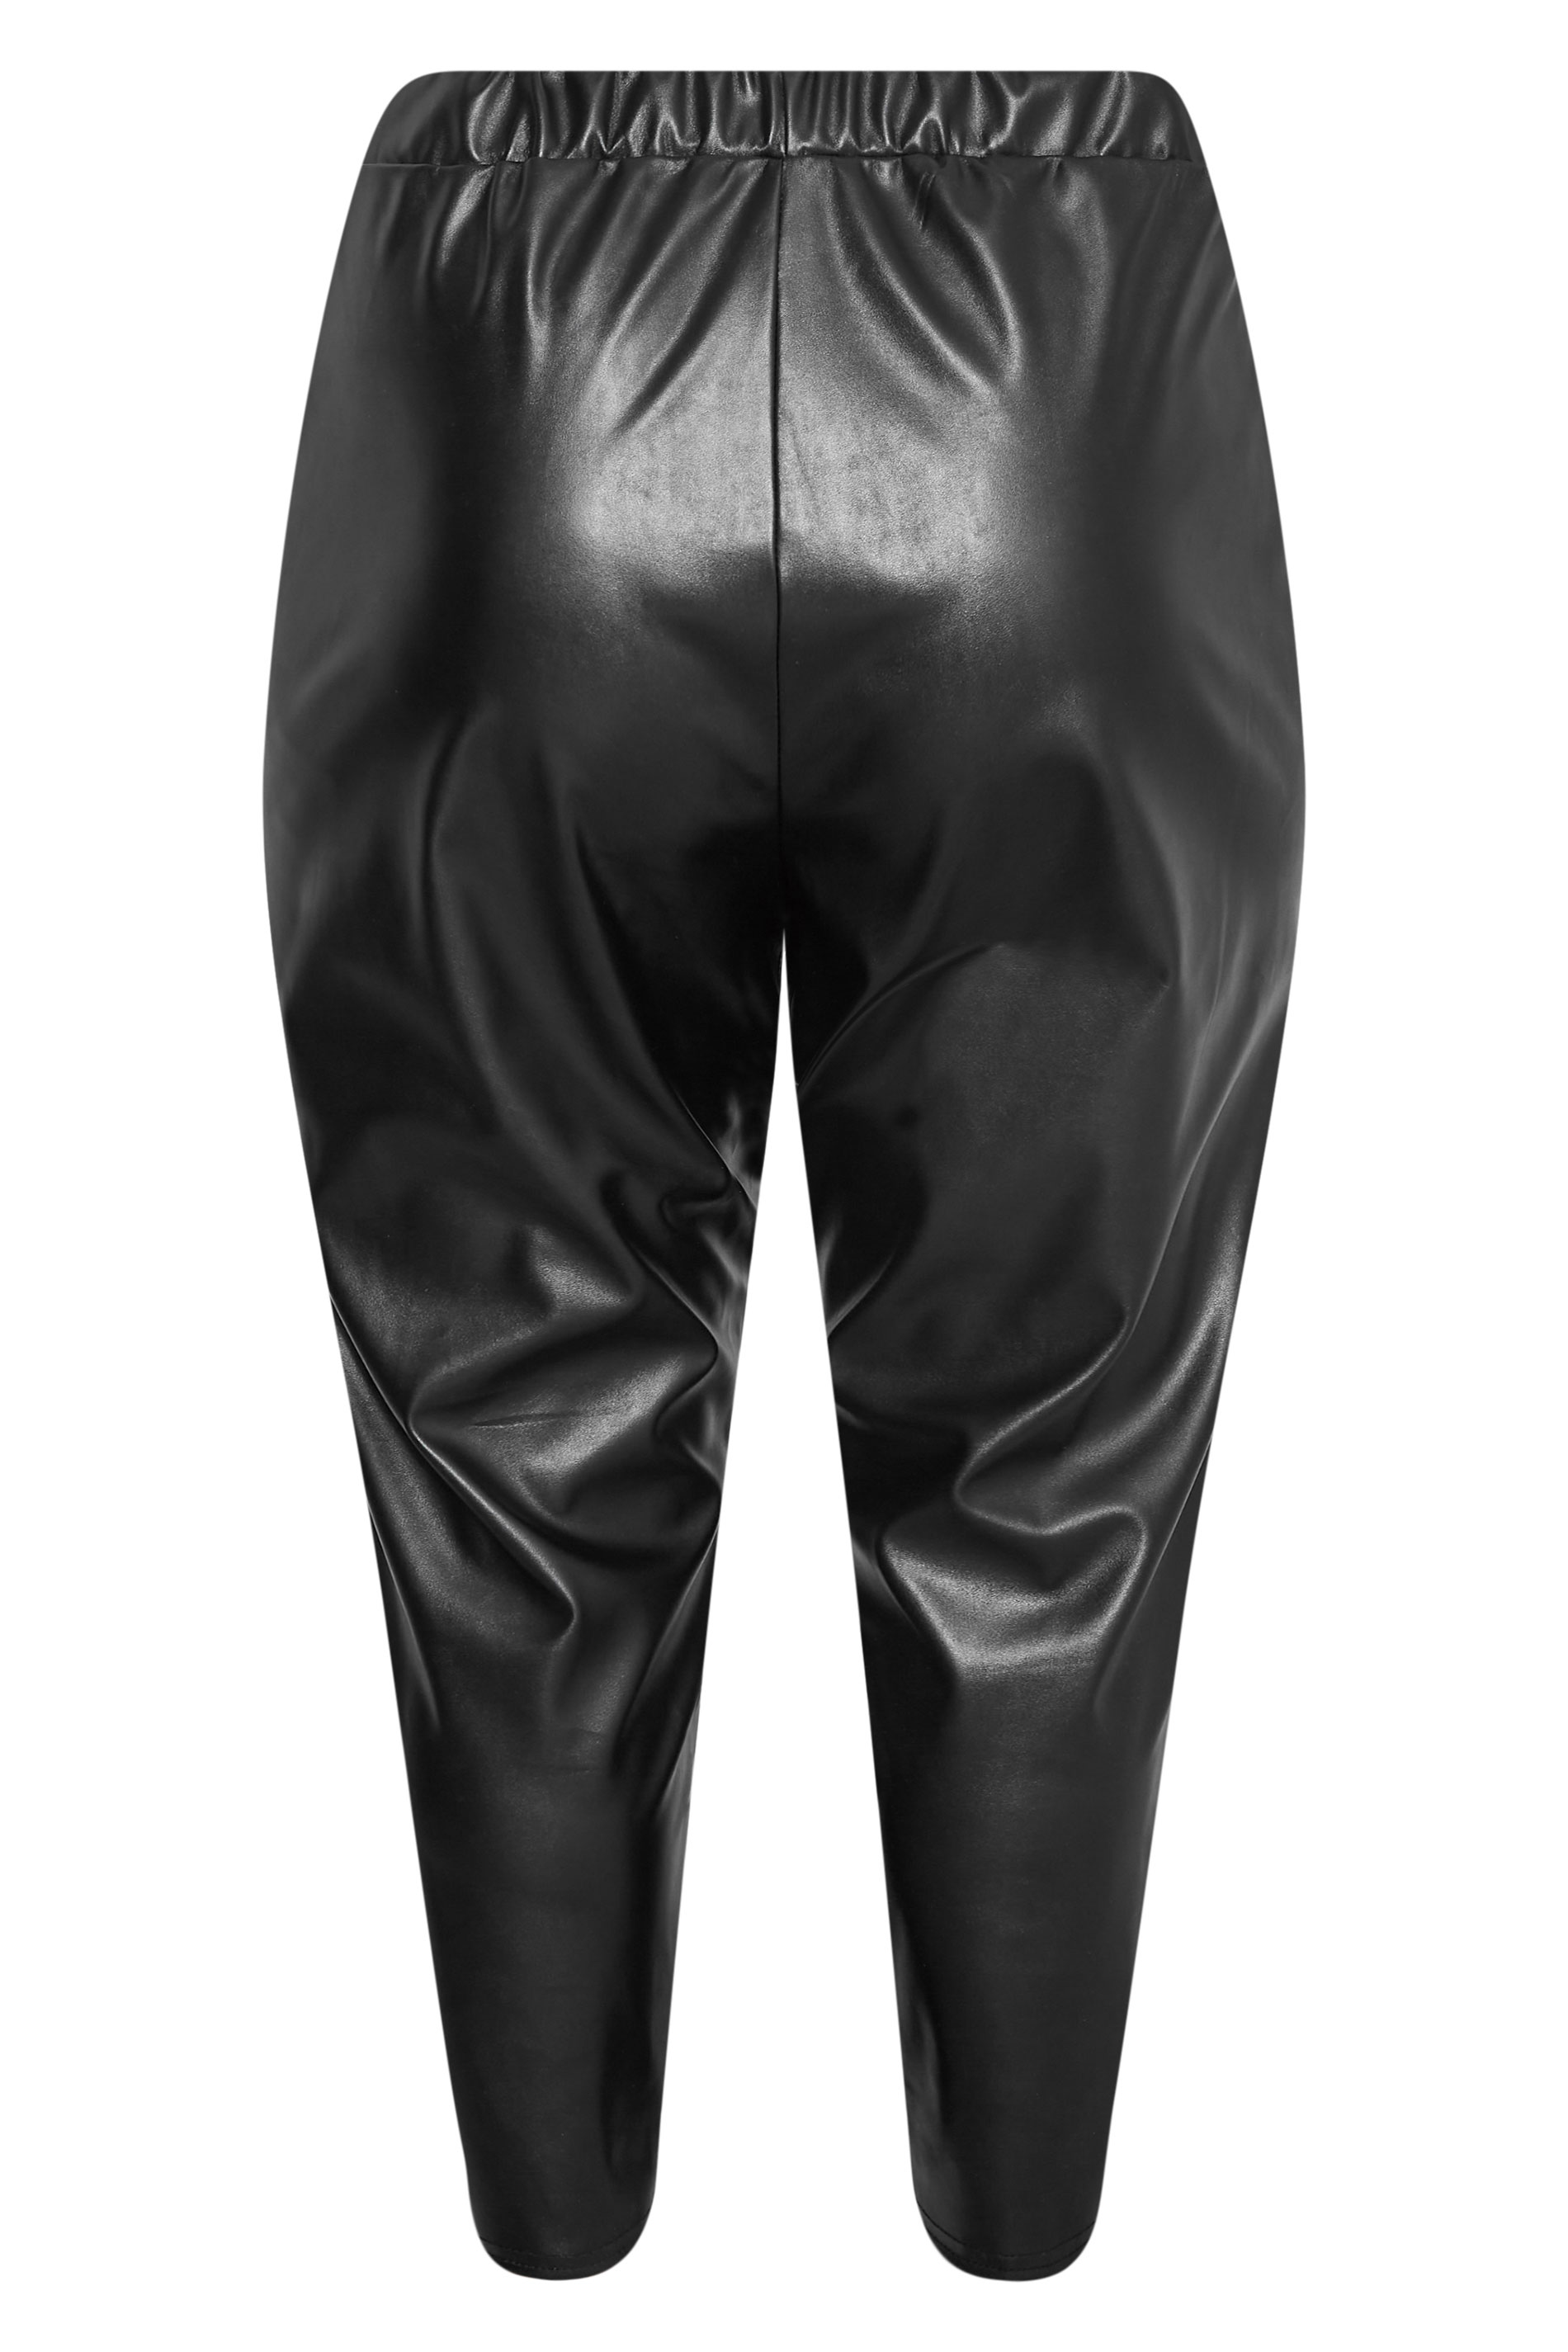 LIMITED COLLECTION Plus Size Black Faux Leather Trousers